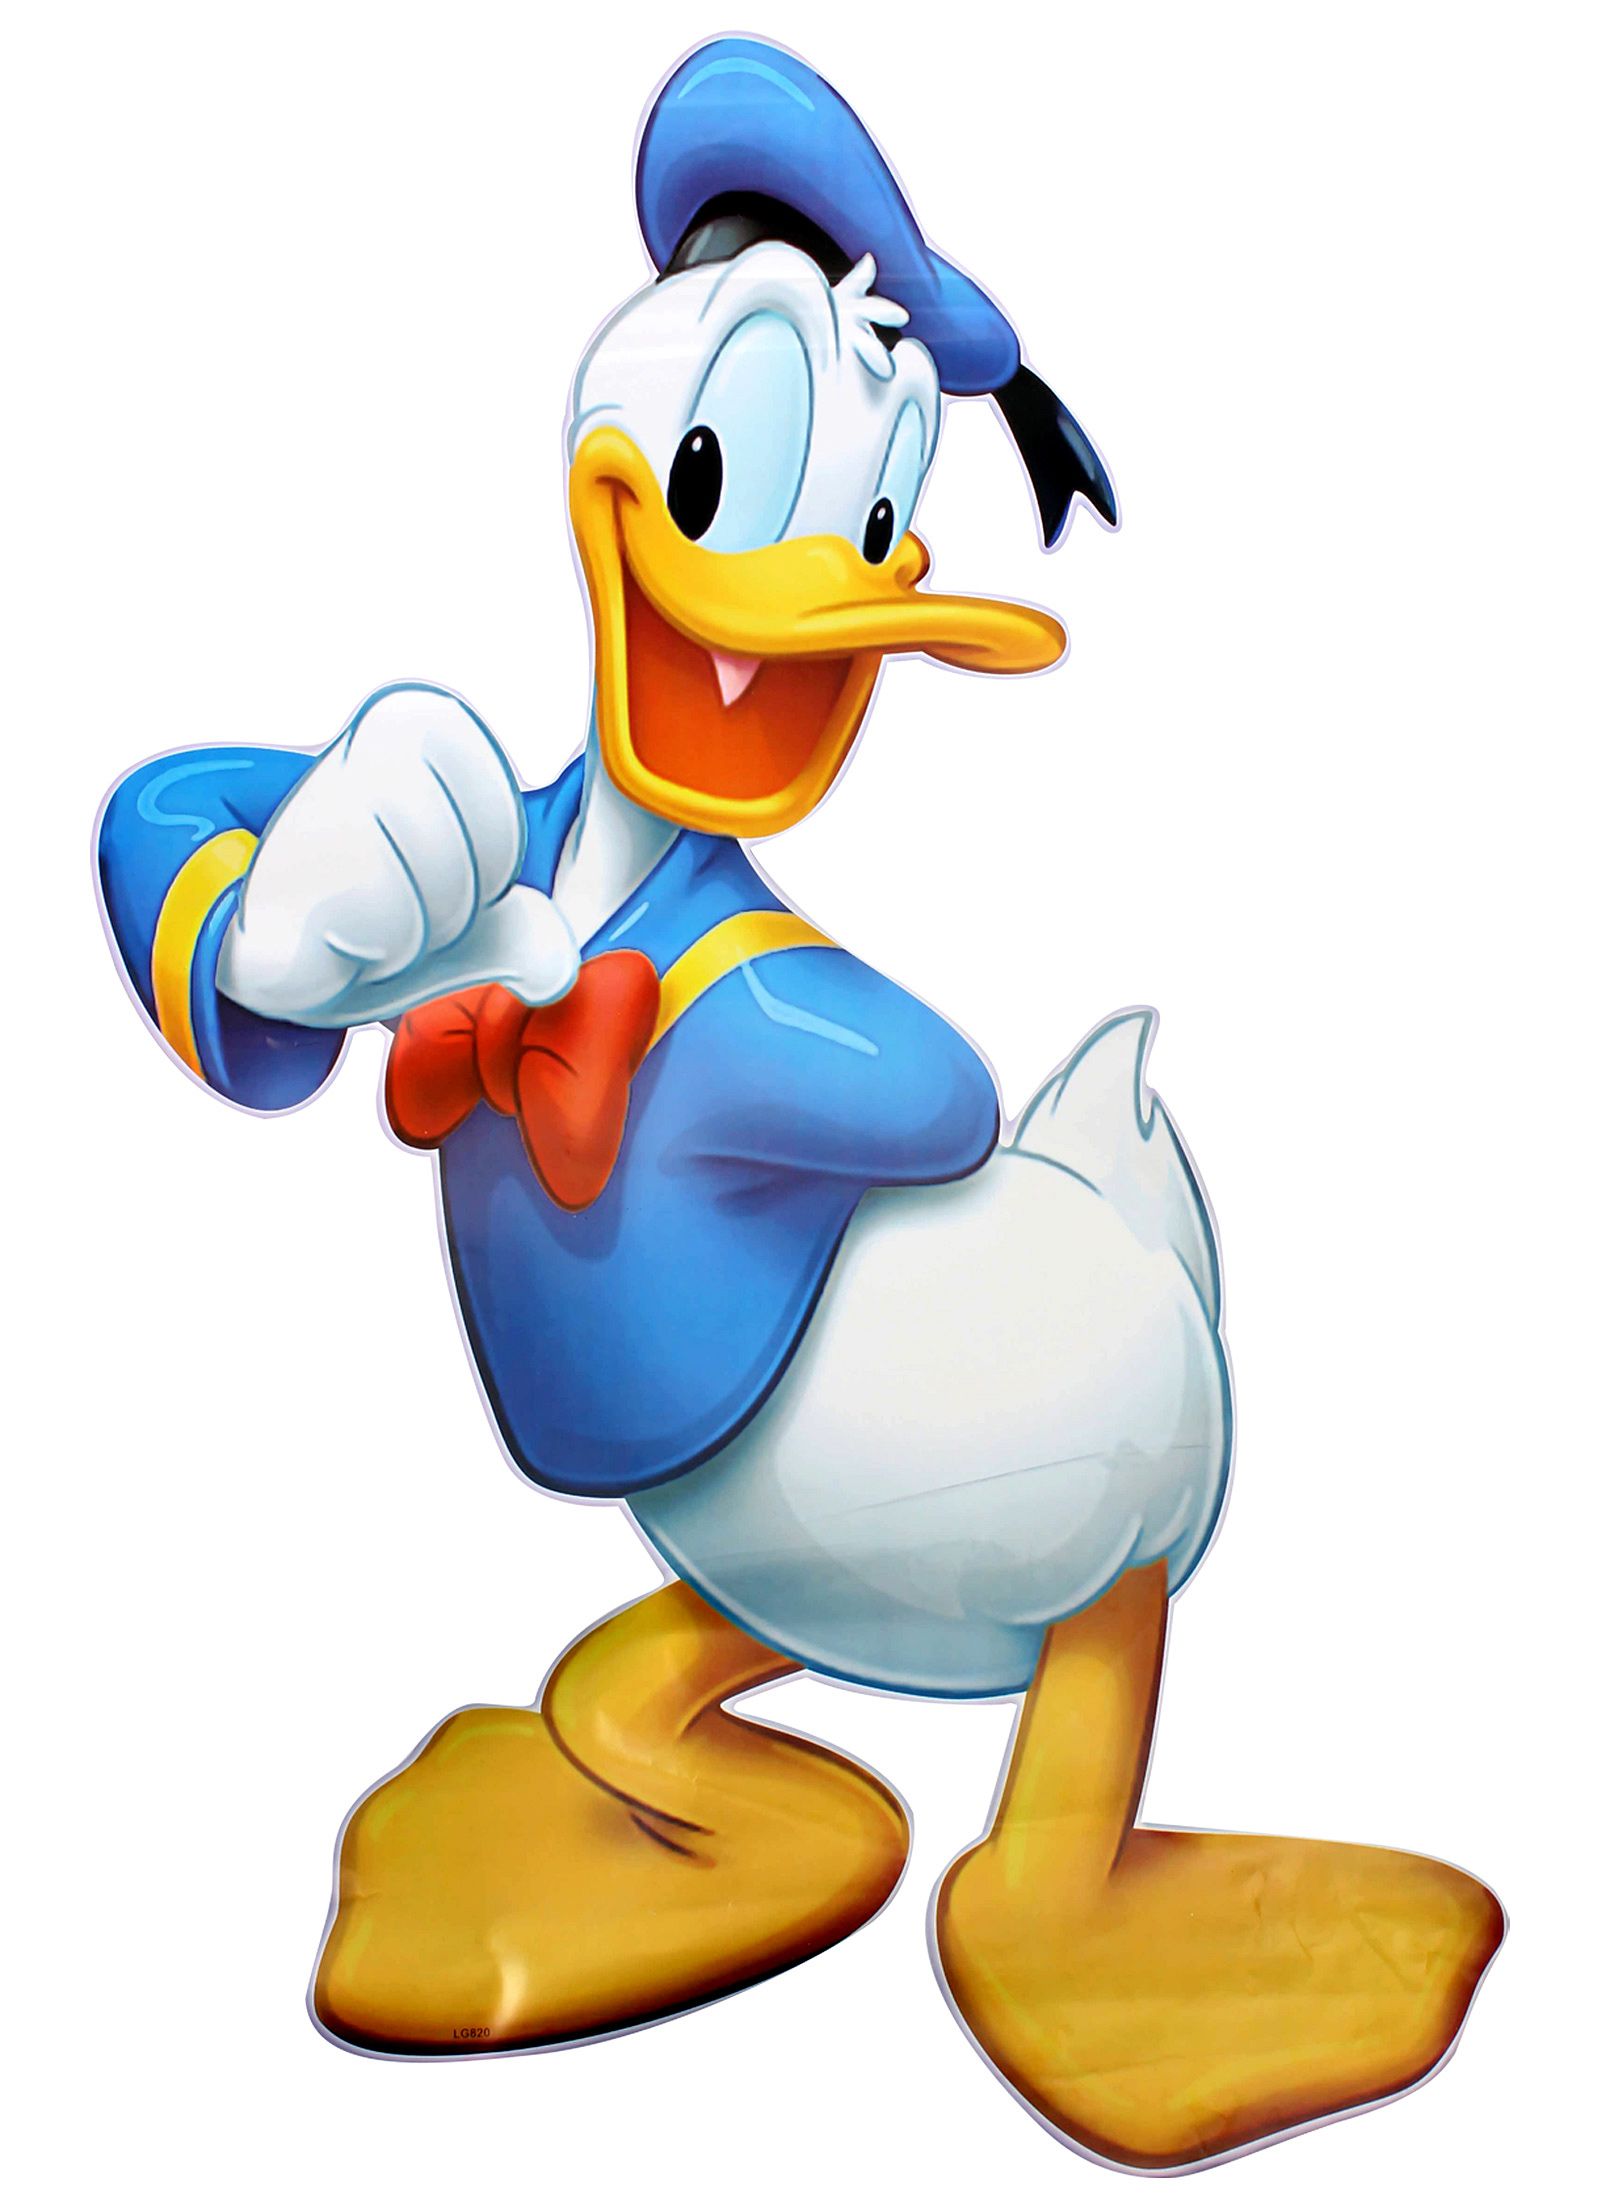 Donald Duck Cartoon Wallpaper Image for Android - Cartoons Wallpapers